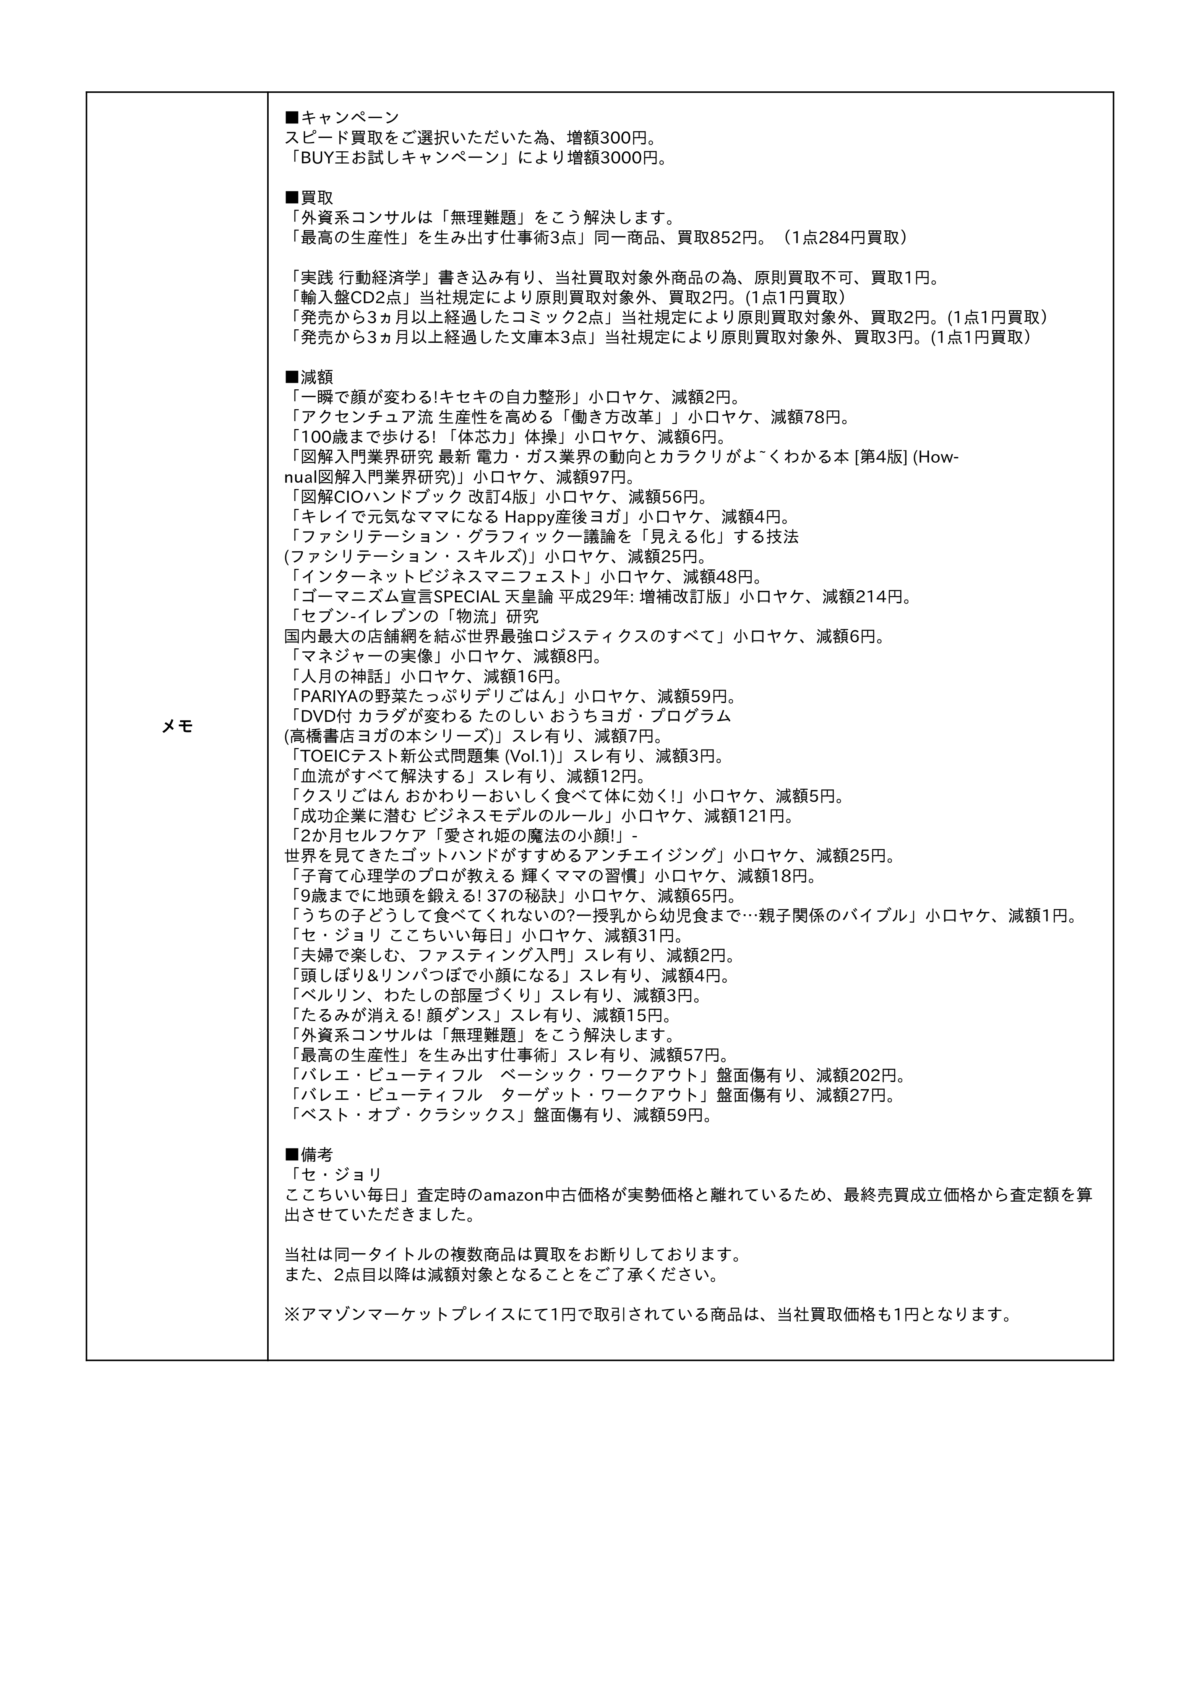 BUY王の査定結果明細 書籍 その5